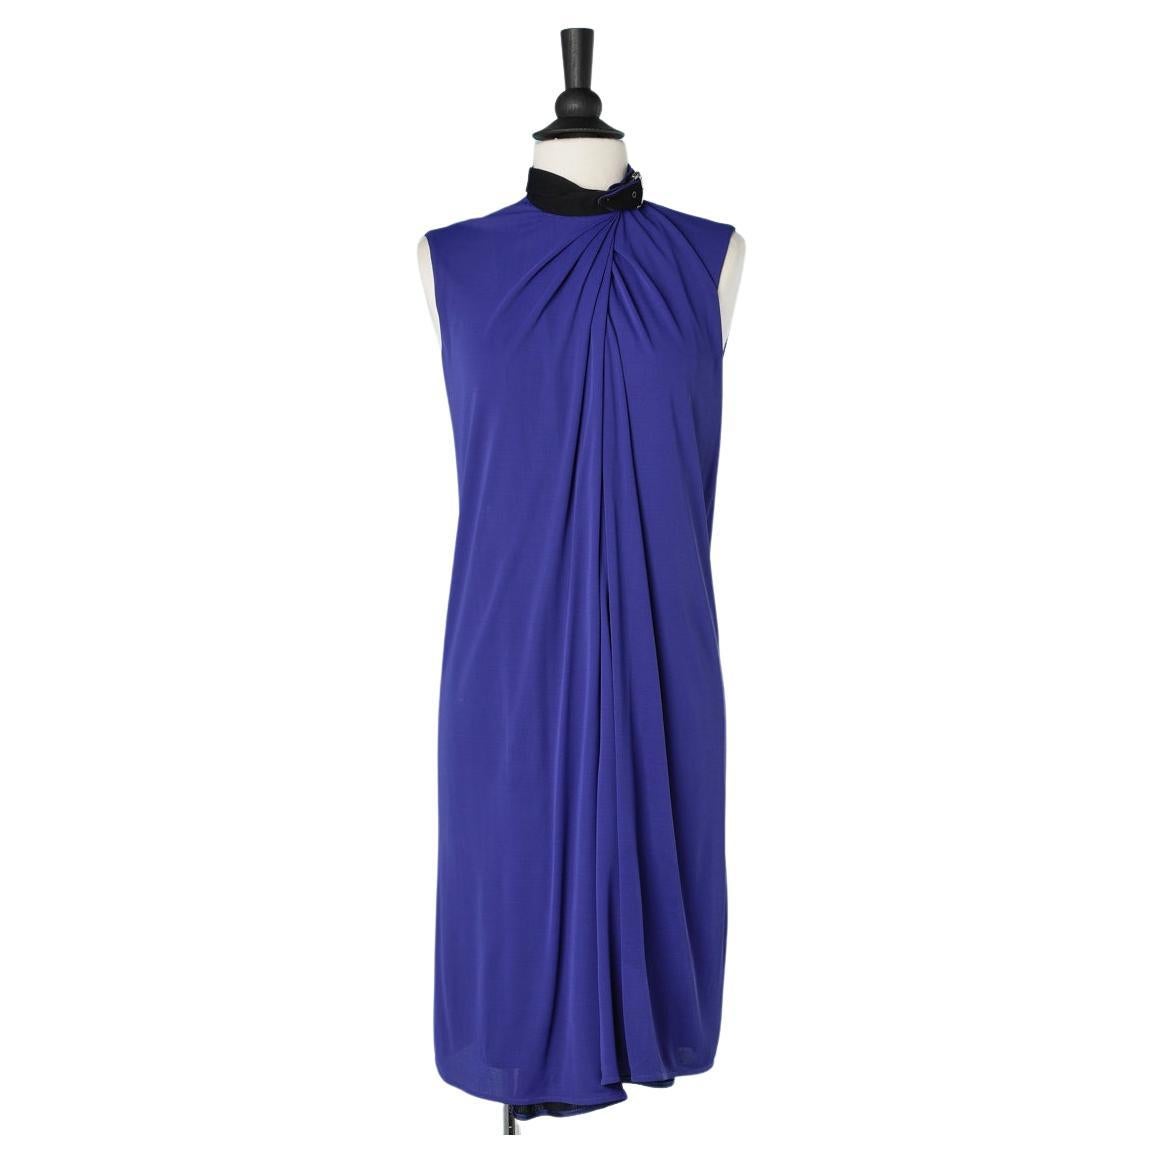 Blue double lays jersey wrap dress with belt around the neck Jean Paul Gaultier 